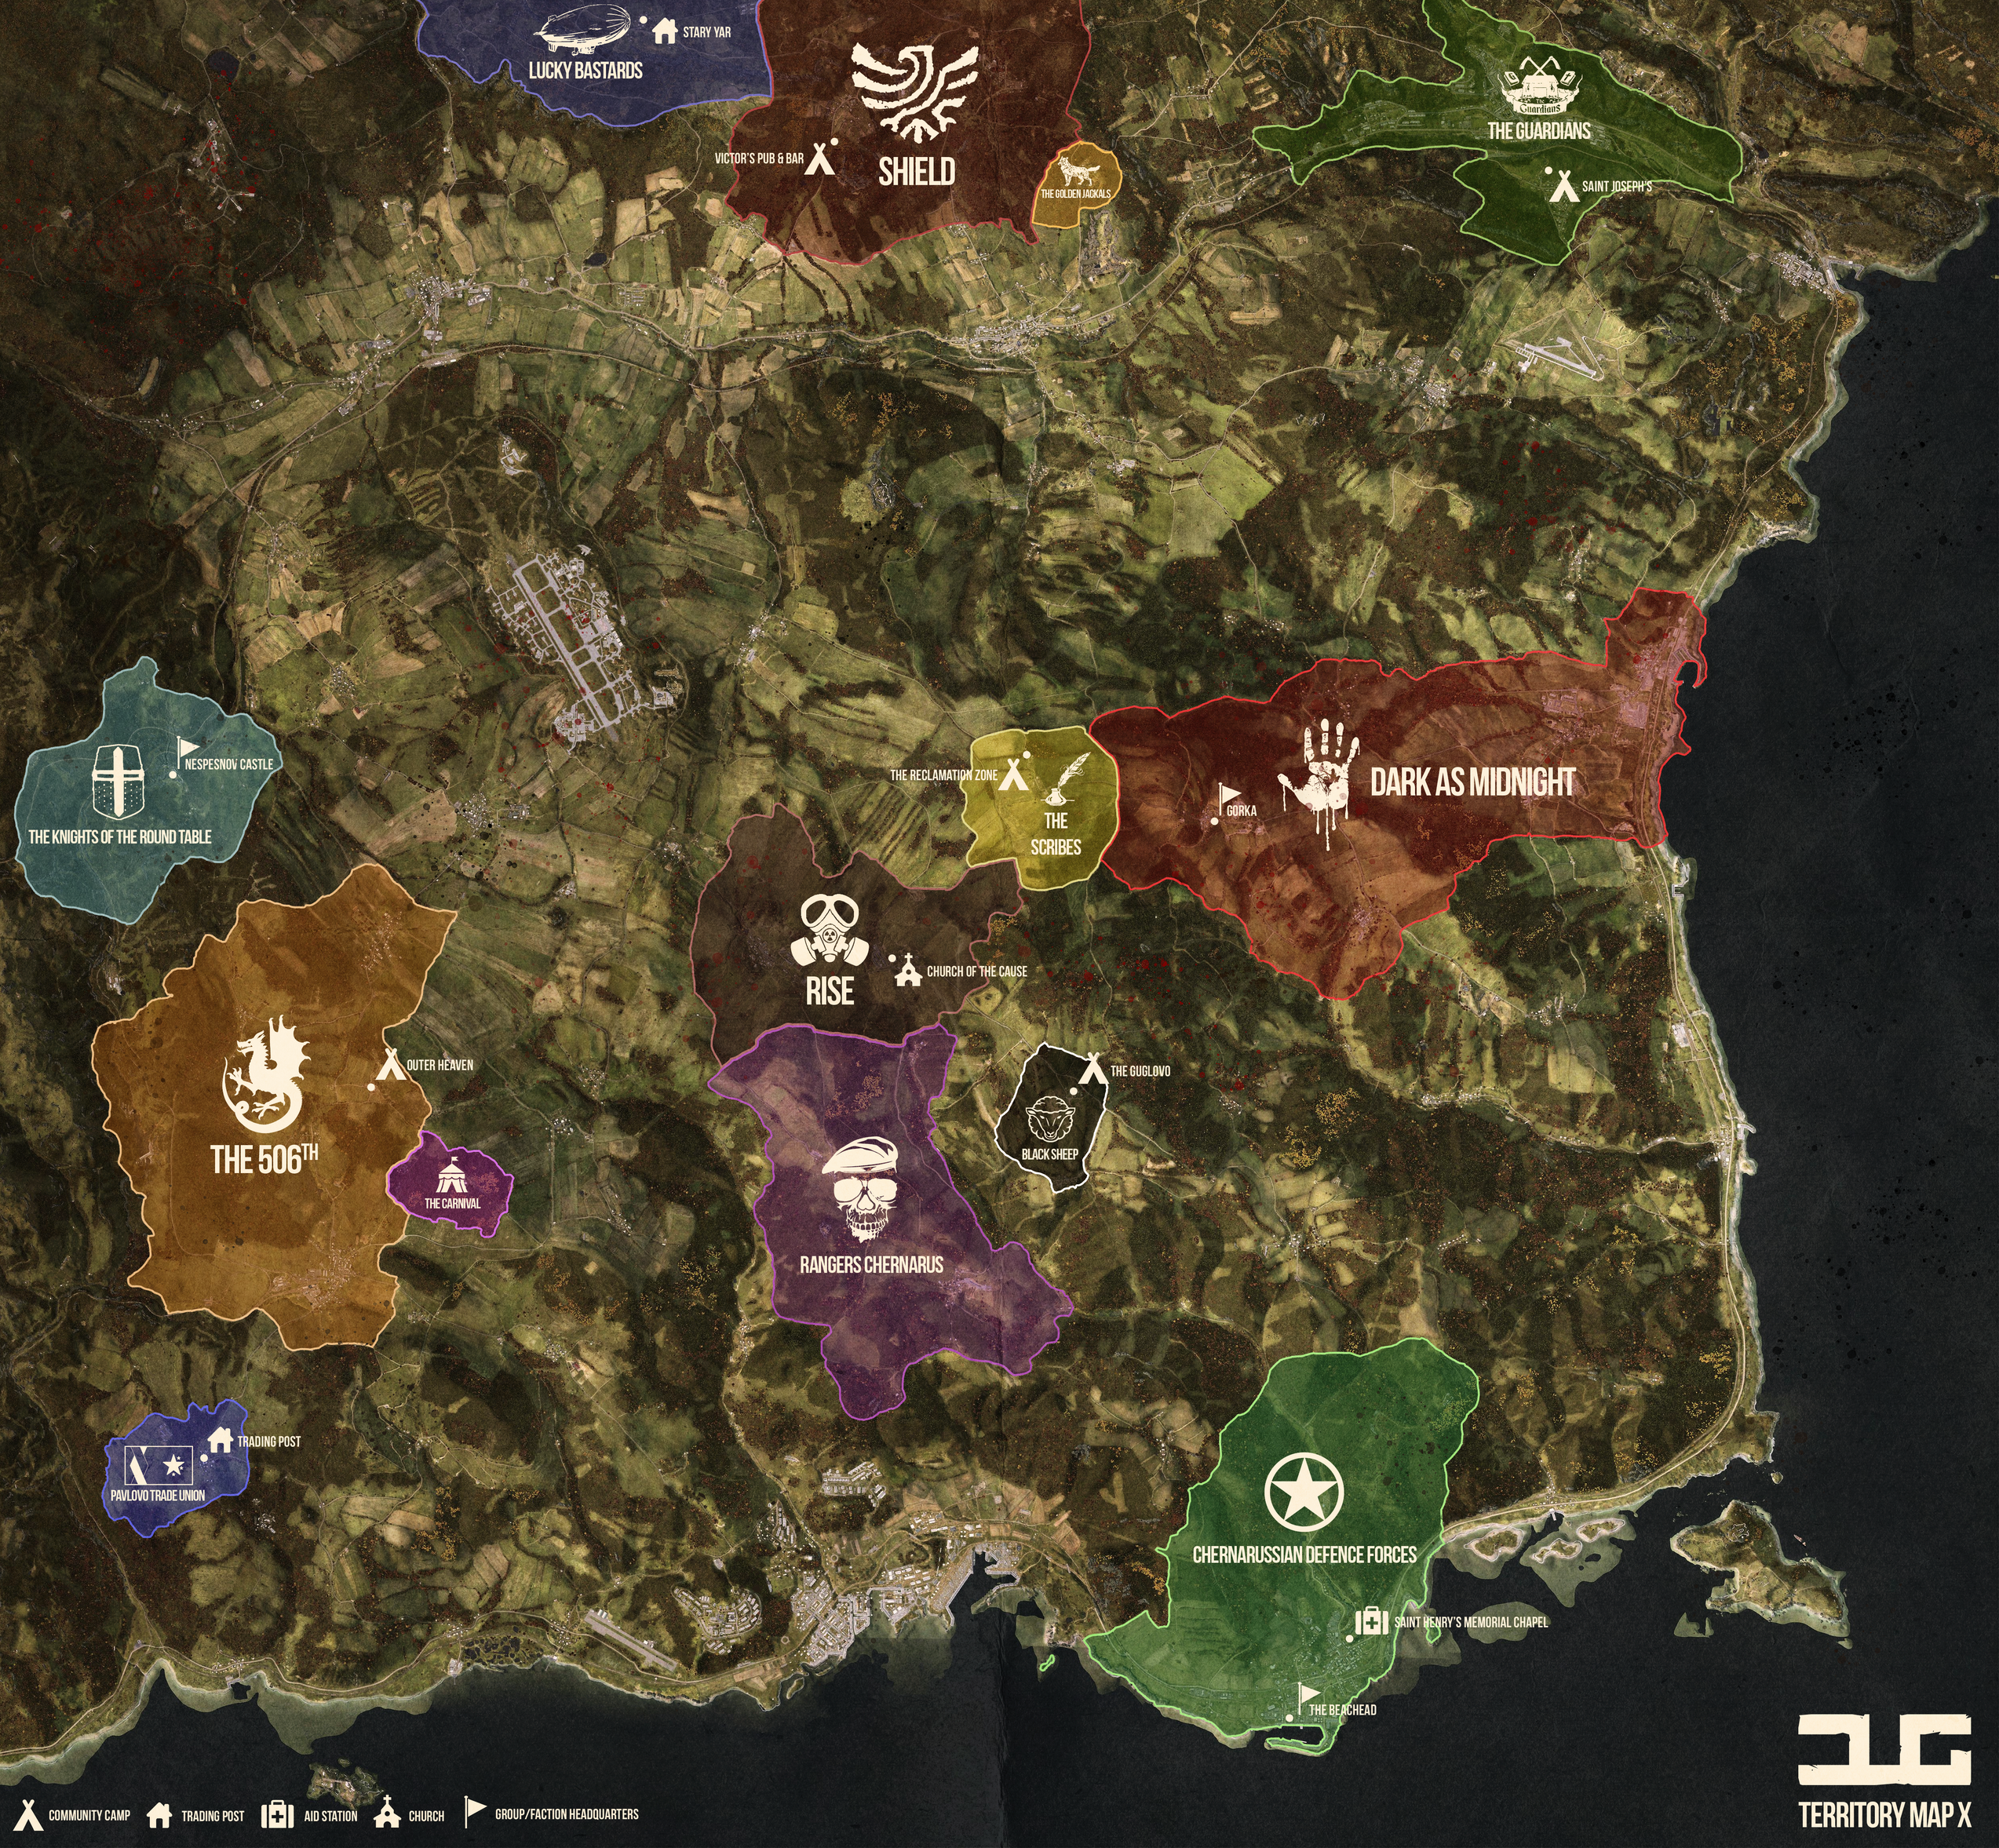 Steam Community :: Guide :: [ENG] DayZ Map